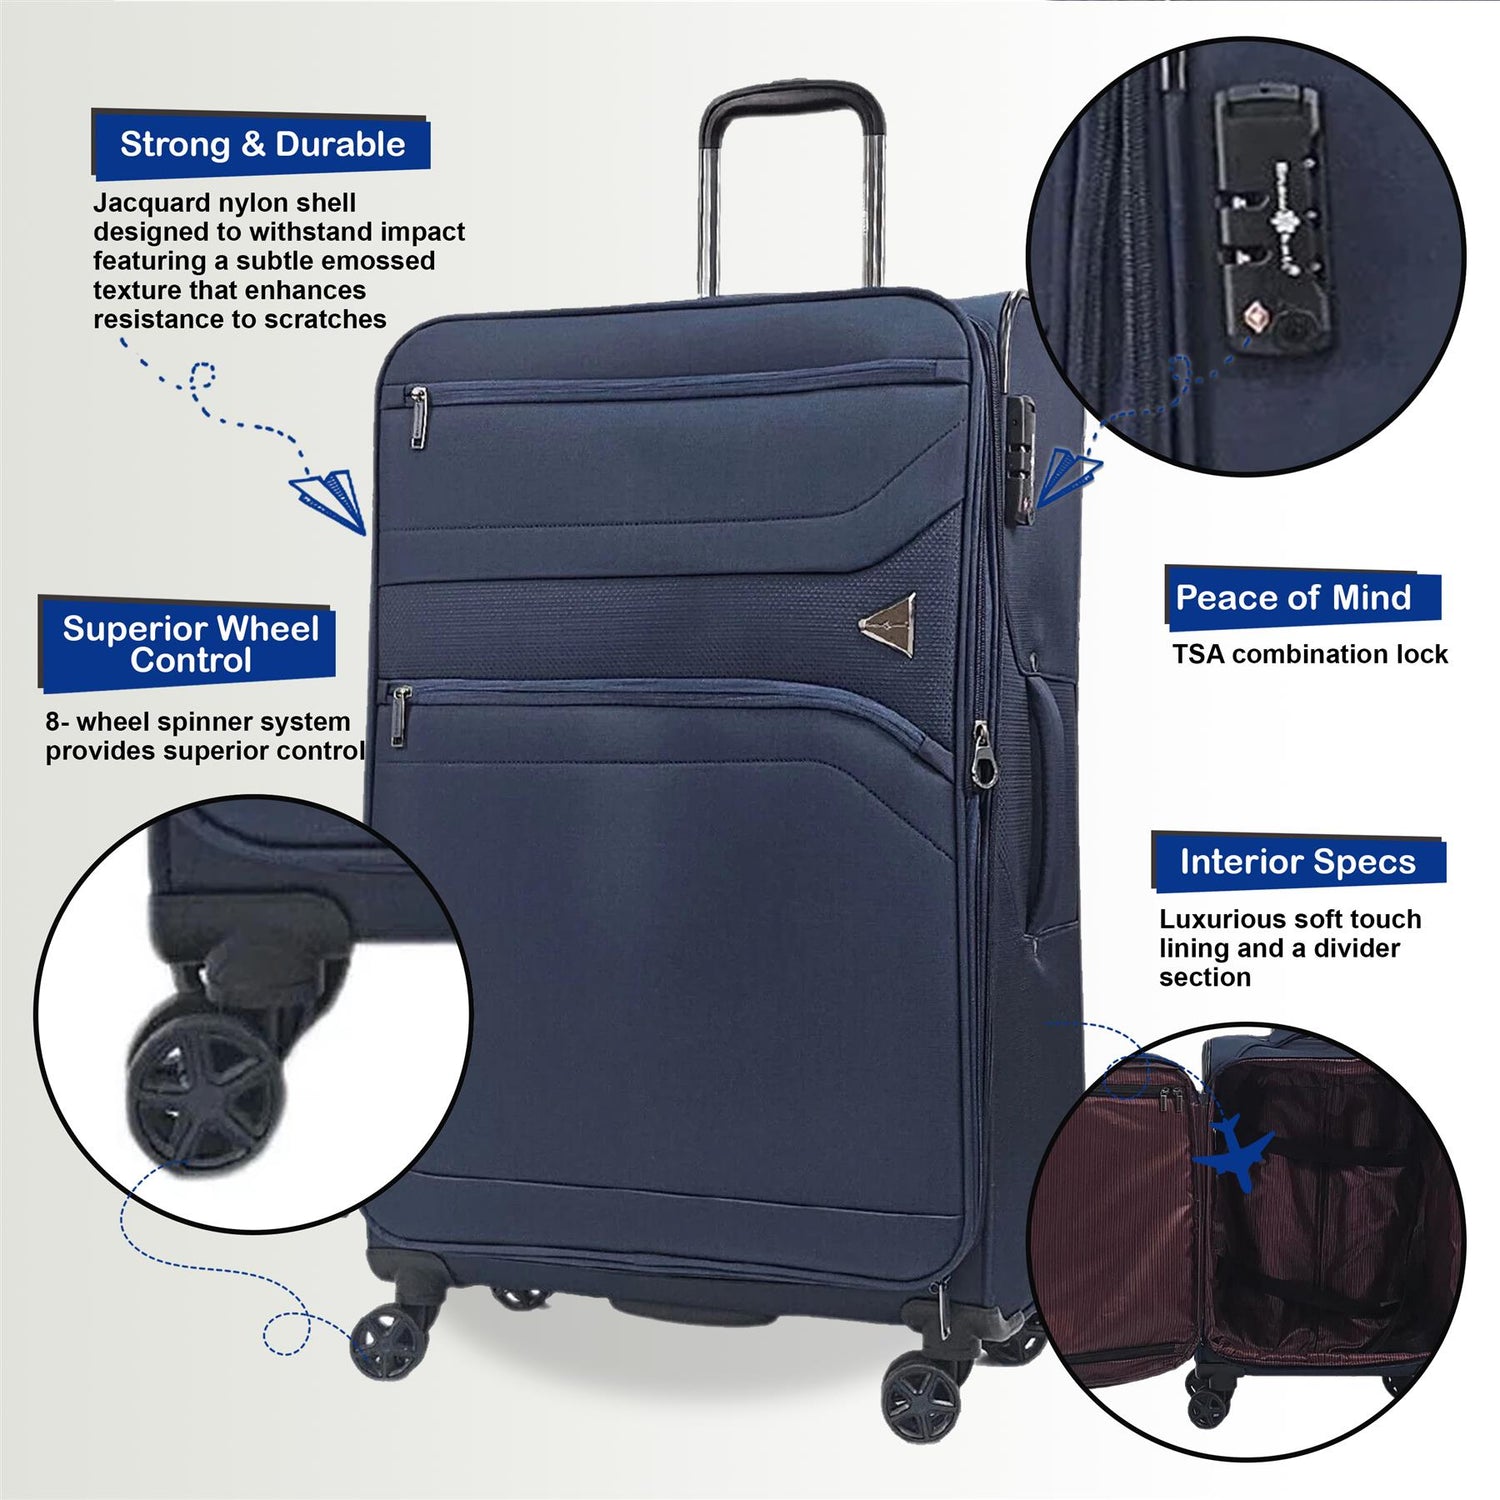 Clayton Large Soft Shell Suitcase in Navy